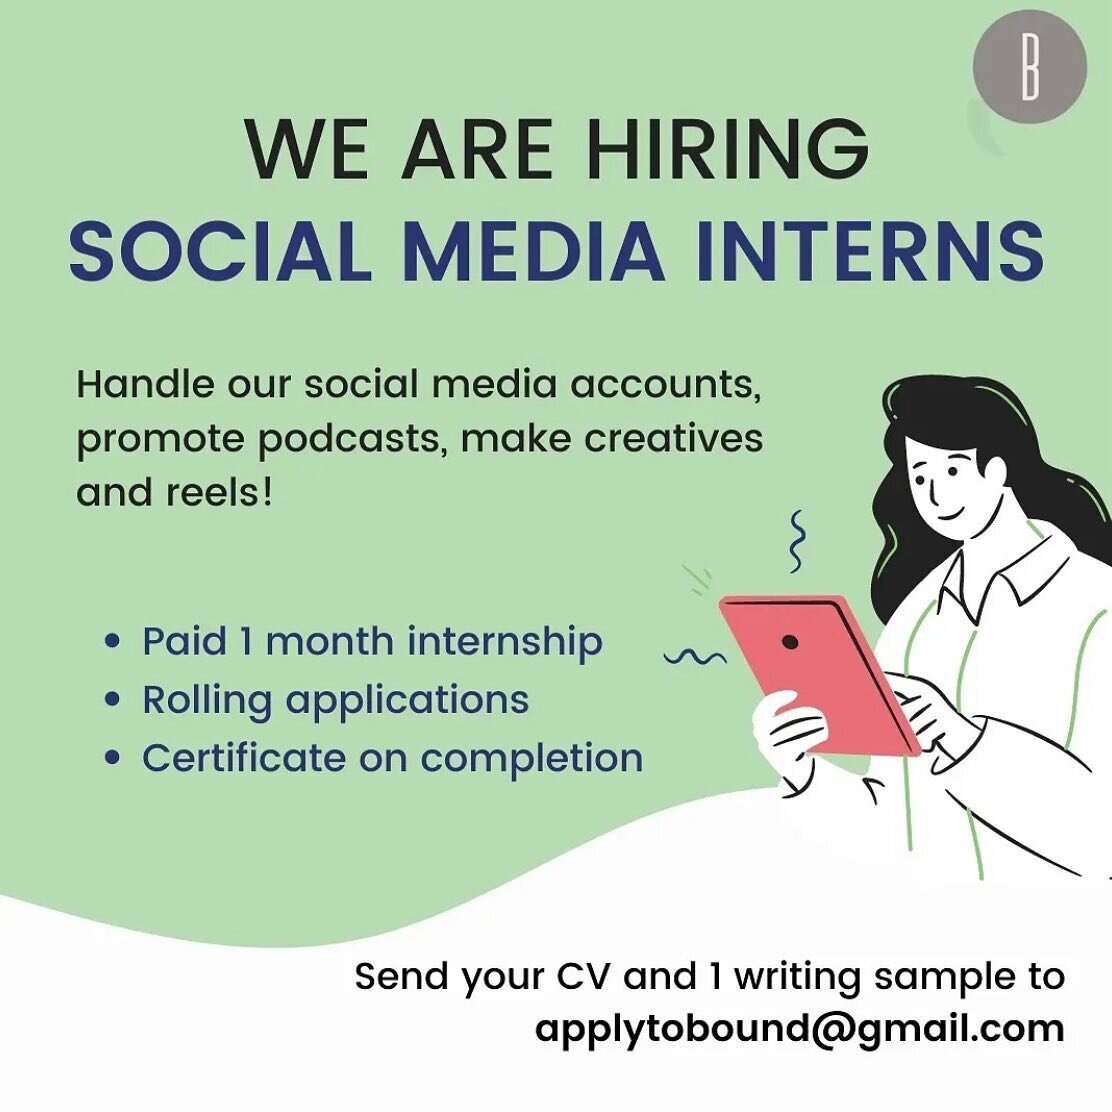 @boundindia is hiring interns! 

Are you a creative thinker? Have an eye for aesthetics and a flair for writing? Can you make engaging social media content? 

Join our team as a social media intern! 

Handle our social media accounts, make creatives,